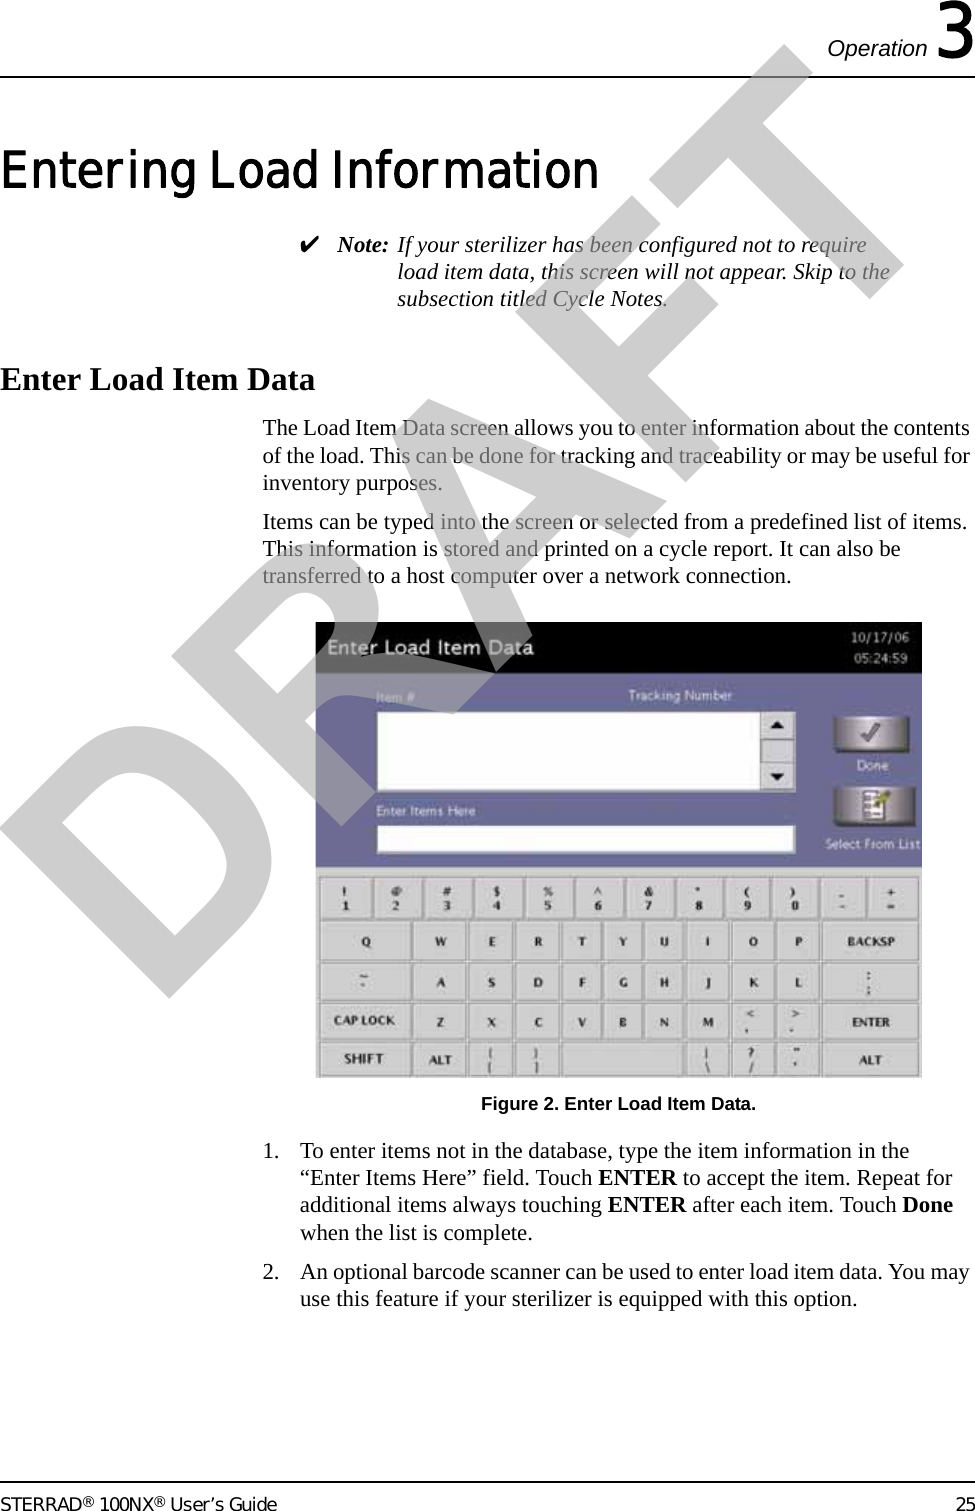 Operation 3STERRAD® 100NX® User’s Guide 25Entering Load Information✔Note: If your sterilizer has been configured not to require load item data, this screen will not appear. Skip to the subsection titled Cycle Notes.Enter Load Item DataThe Load Item Data screen allows you to enter information about the contents of the load. This can be done for tracking and traceability or may be useful for inventory purposes. Items can be typed into the screen or selected from a predefined list of items. This information is stored and printed on a cycle report. It can also be transferred to a host computer over a network connection.Figure 2. Enter Load Item Data.1. To enter items not in the database, type the item information in the “Enter Items Here” field. Touch ENTER to accept the item. Repeat for additional items always touching ENTER after each item. Touch Done when the list is complete.2. An optional barcode scanner can be used to enter load item data. You may use this feature if your sterilizer is equipped with this option.DRAFT